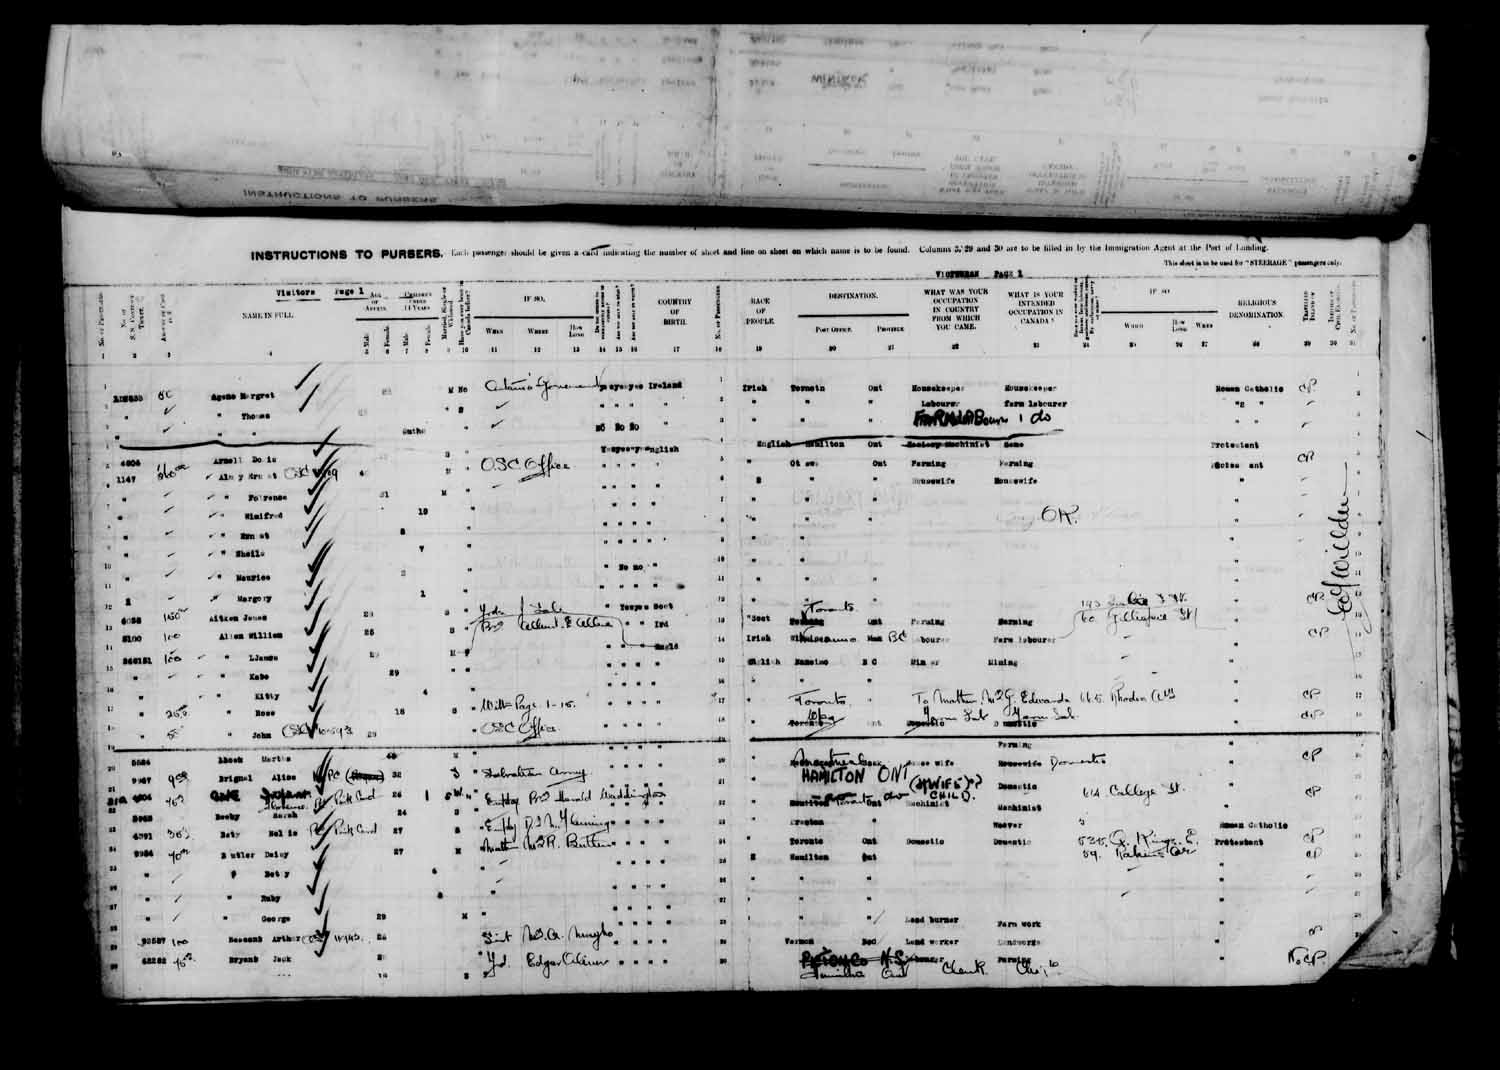 Digitized page of Passenger Lists for Image No.: e003610641